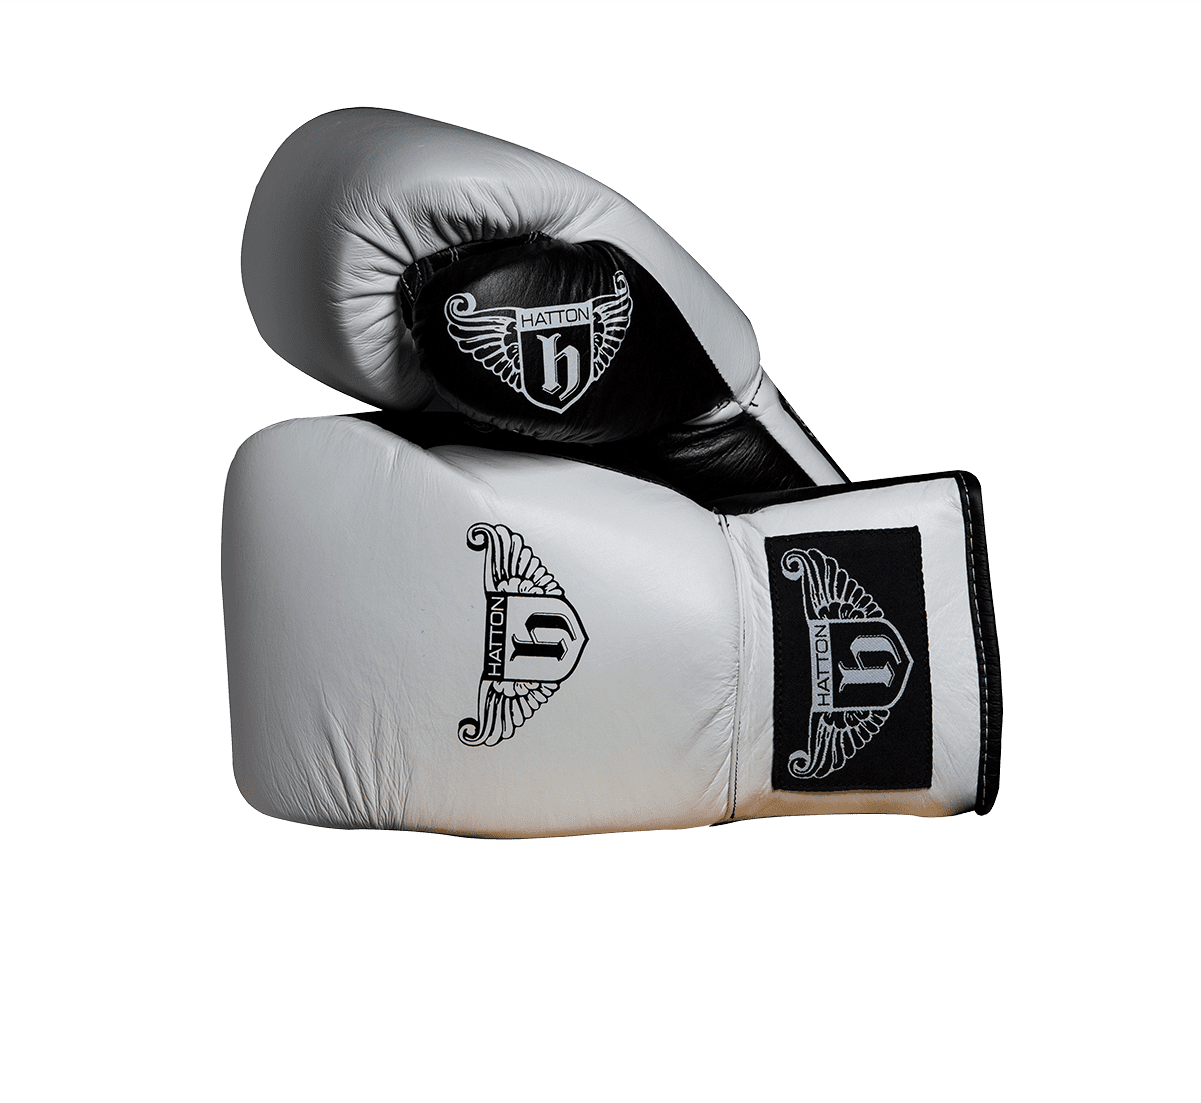 Professional Boxing Gloves Hatton Brand